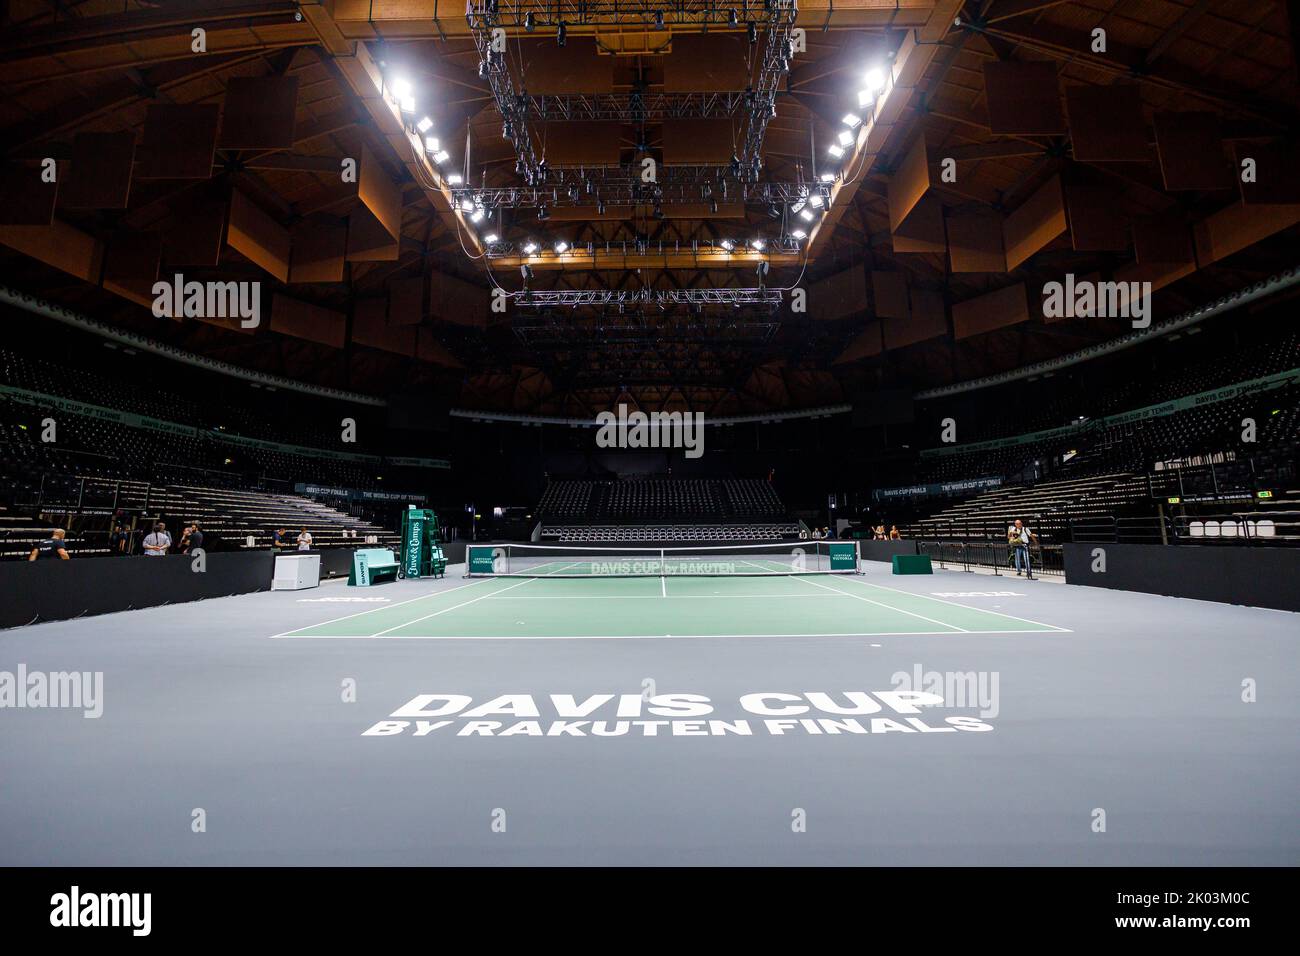 Bologna, ITALY. September 9, 2022. The main court is set up inside the Unipol arena in Casalecchio di Reno near Bologna (Italy). After 46 years, Bologna will host one of the rounds of the Davis Cup by Rakuten finals. The setting up of the Unipol Arena in Casalecchio di Reno has been completed: from Tuesday 13 to Sunday 18 September it will host the matches of the Italian team together with Croatia, Argentina and Sweden. The facility will be able to accommodate up to 8275 fans per day and three courts have been set up: the main court plus two training courts. Credit: Massimiliano Donati/Alamy L Stock Photo